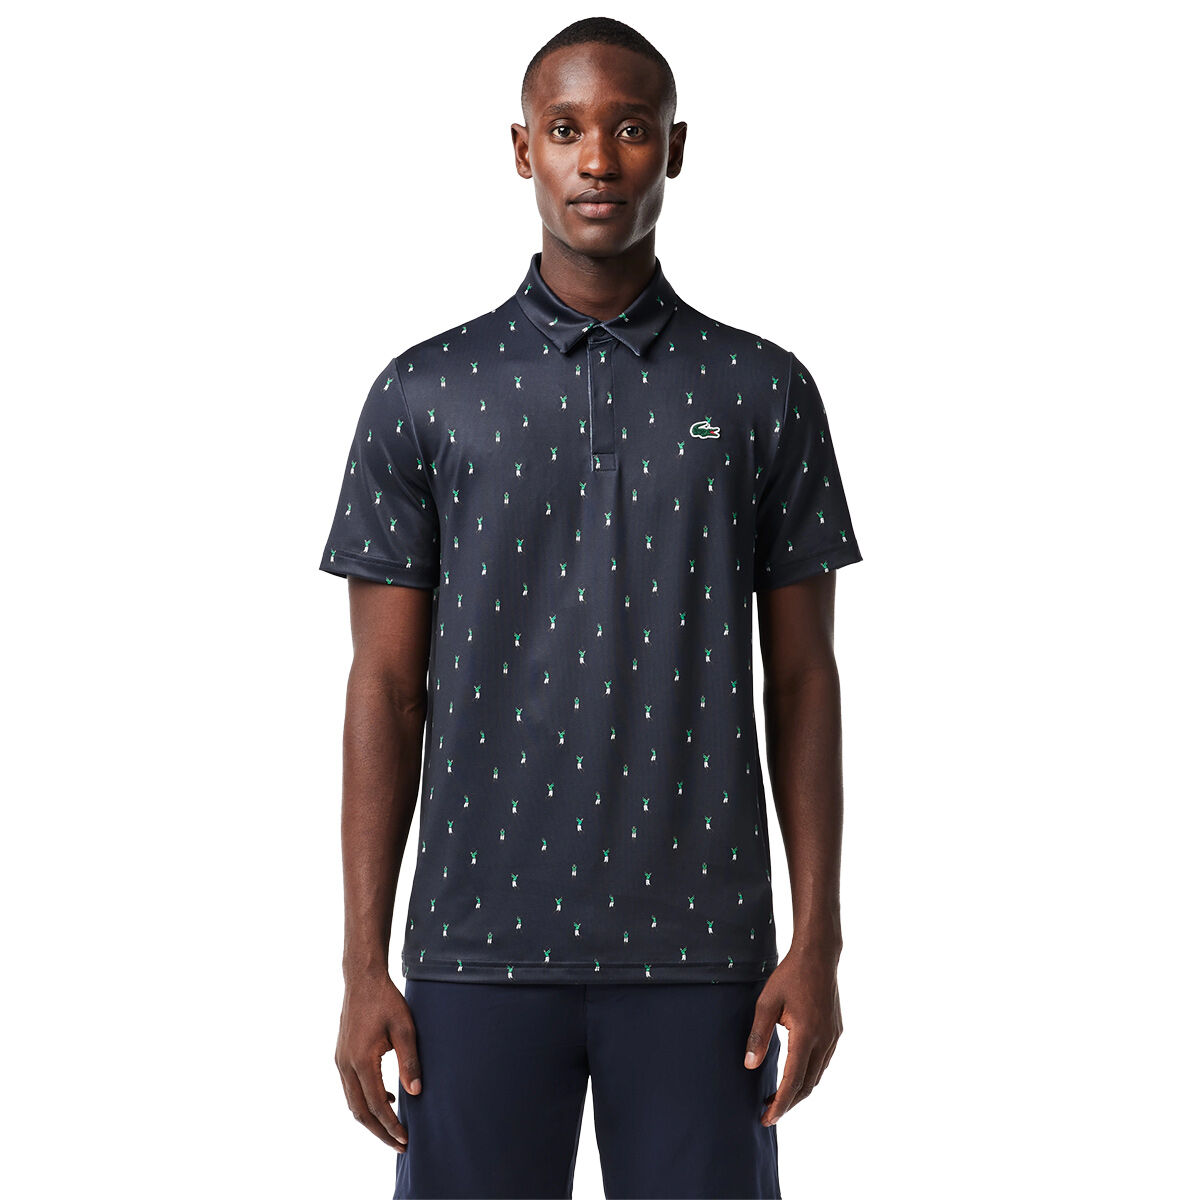 Lacoste Men’s All-Over Print Golf Polo Shirt, Mens, Navy blue, Large | American Golf